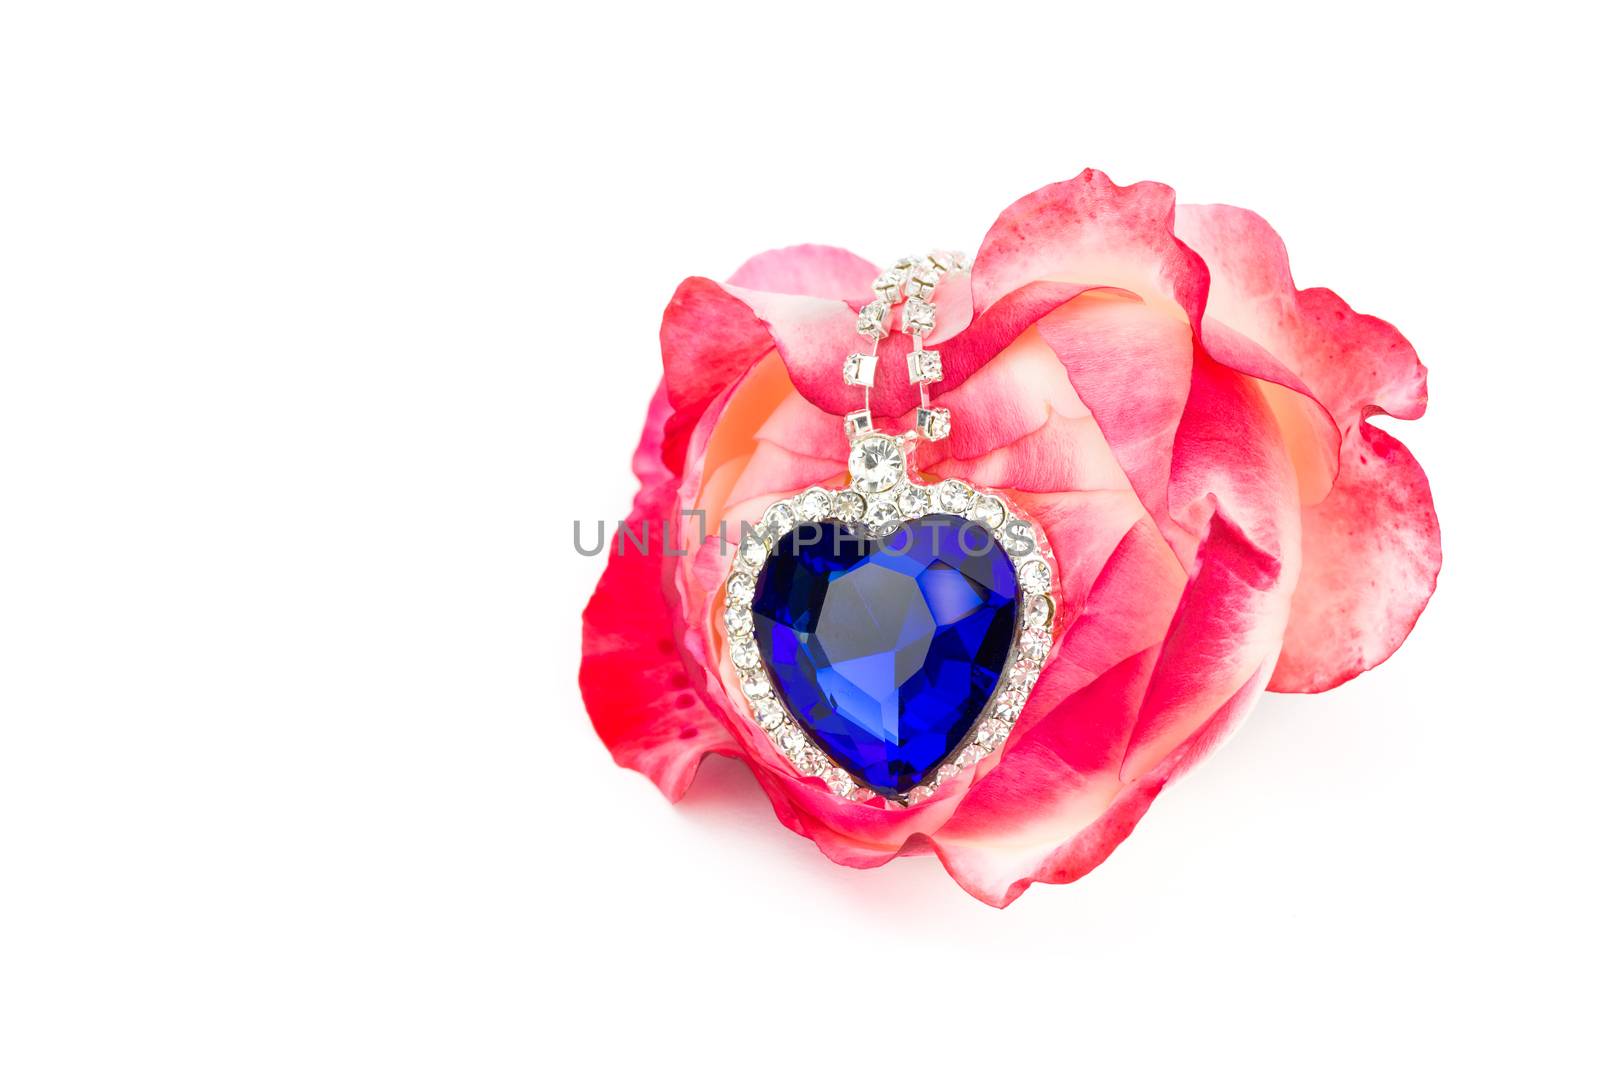 Blue jewelry heart hanging in red rose isolated on white background